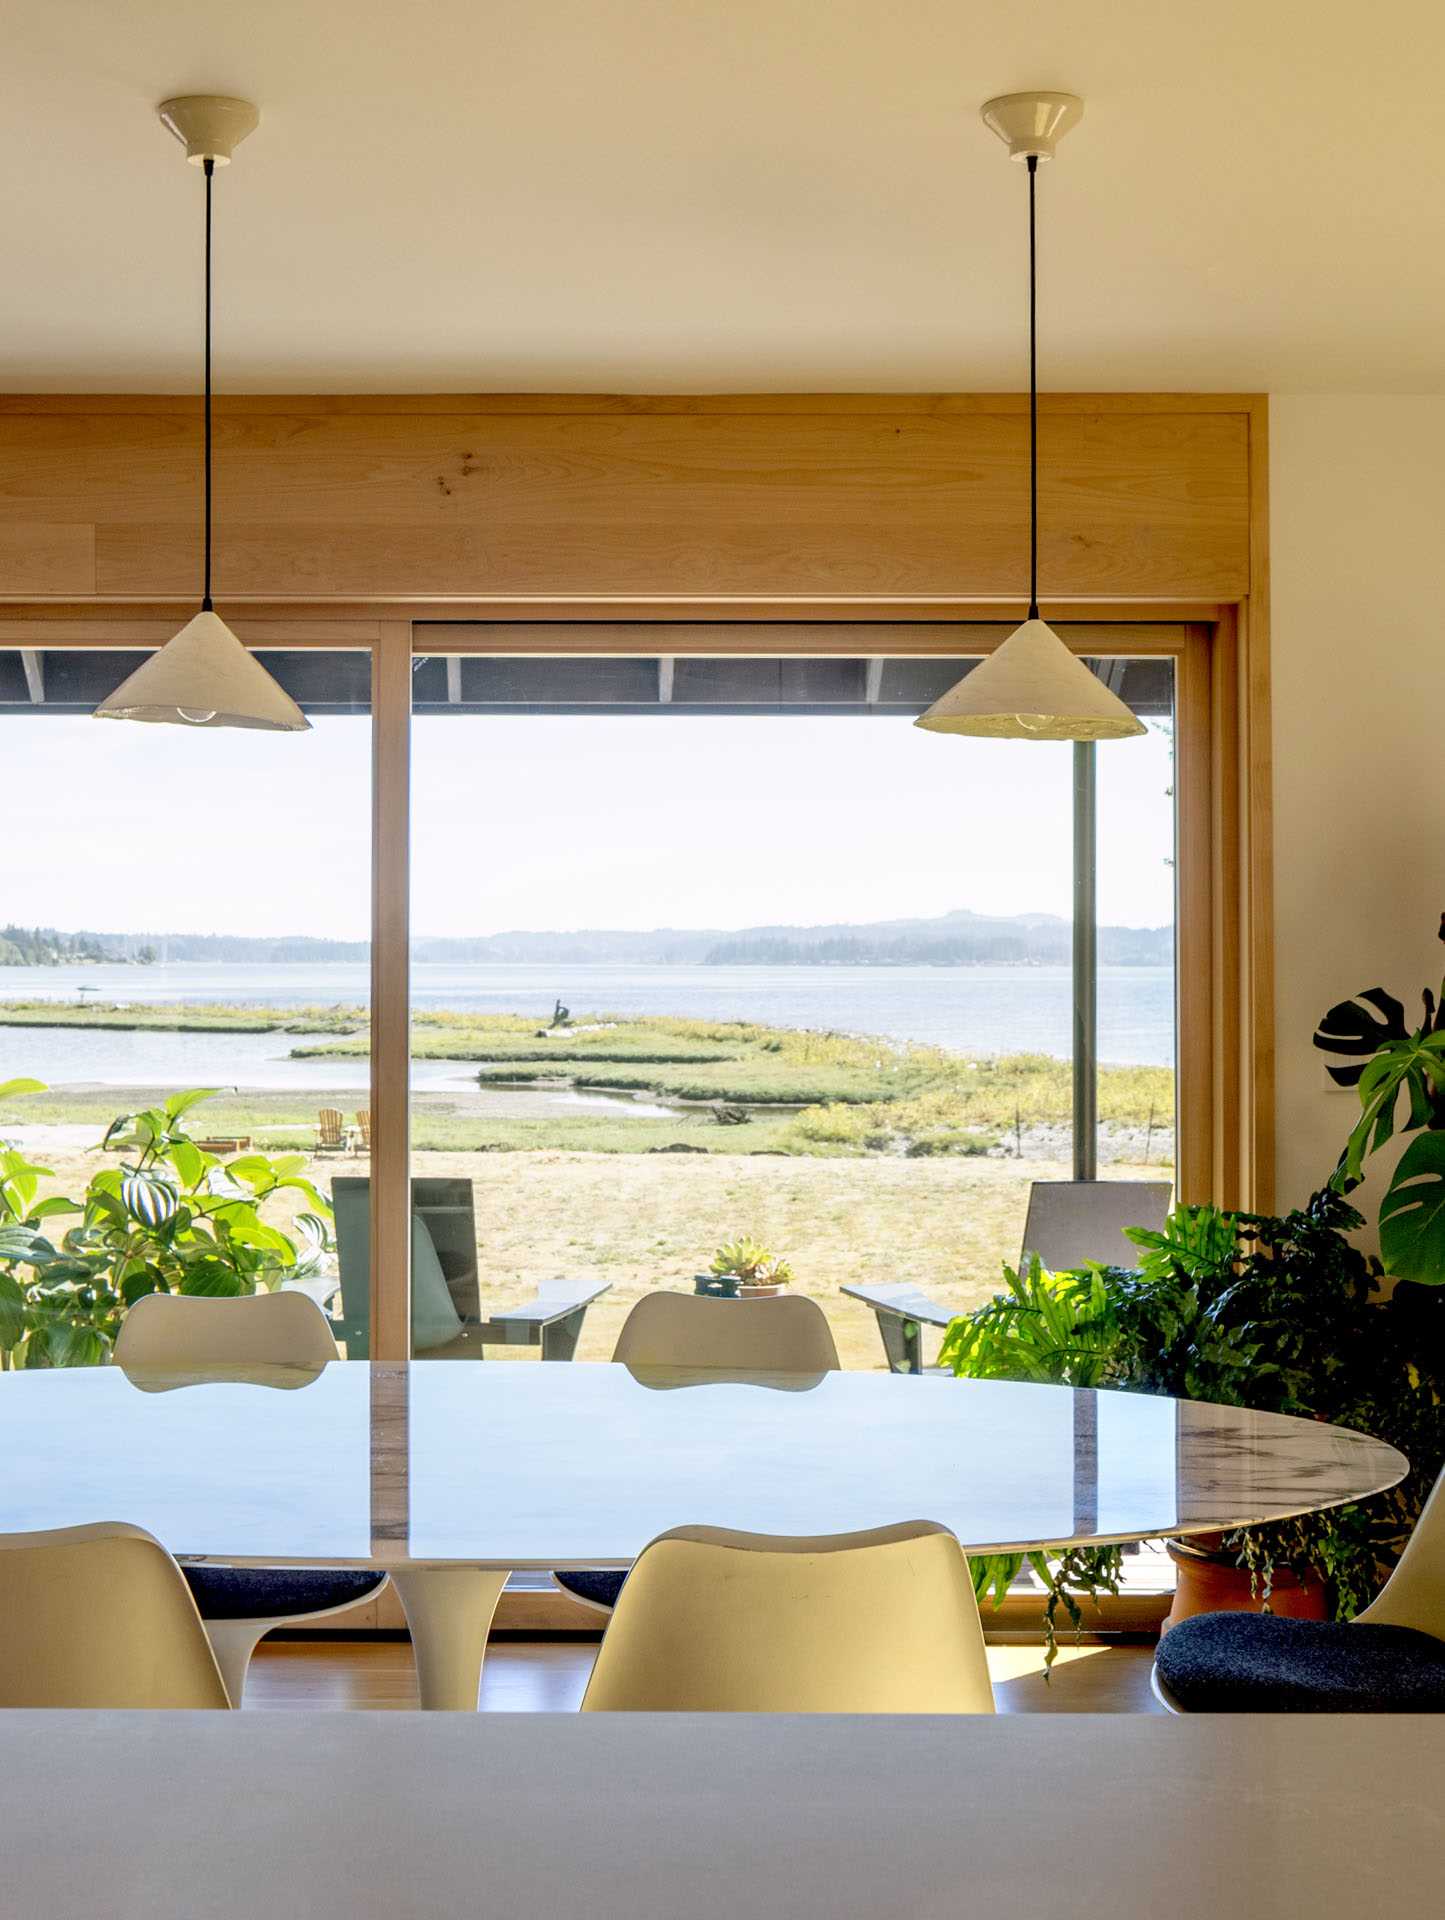 A contemporary open plan dining area with water views.